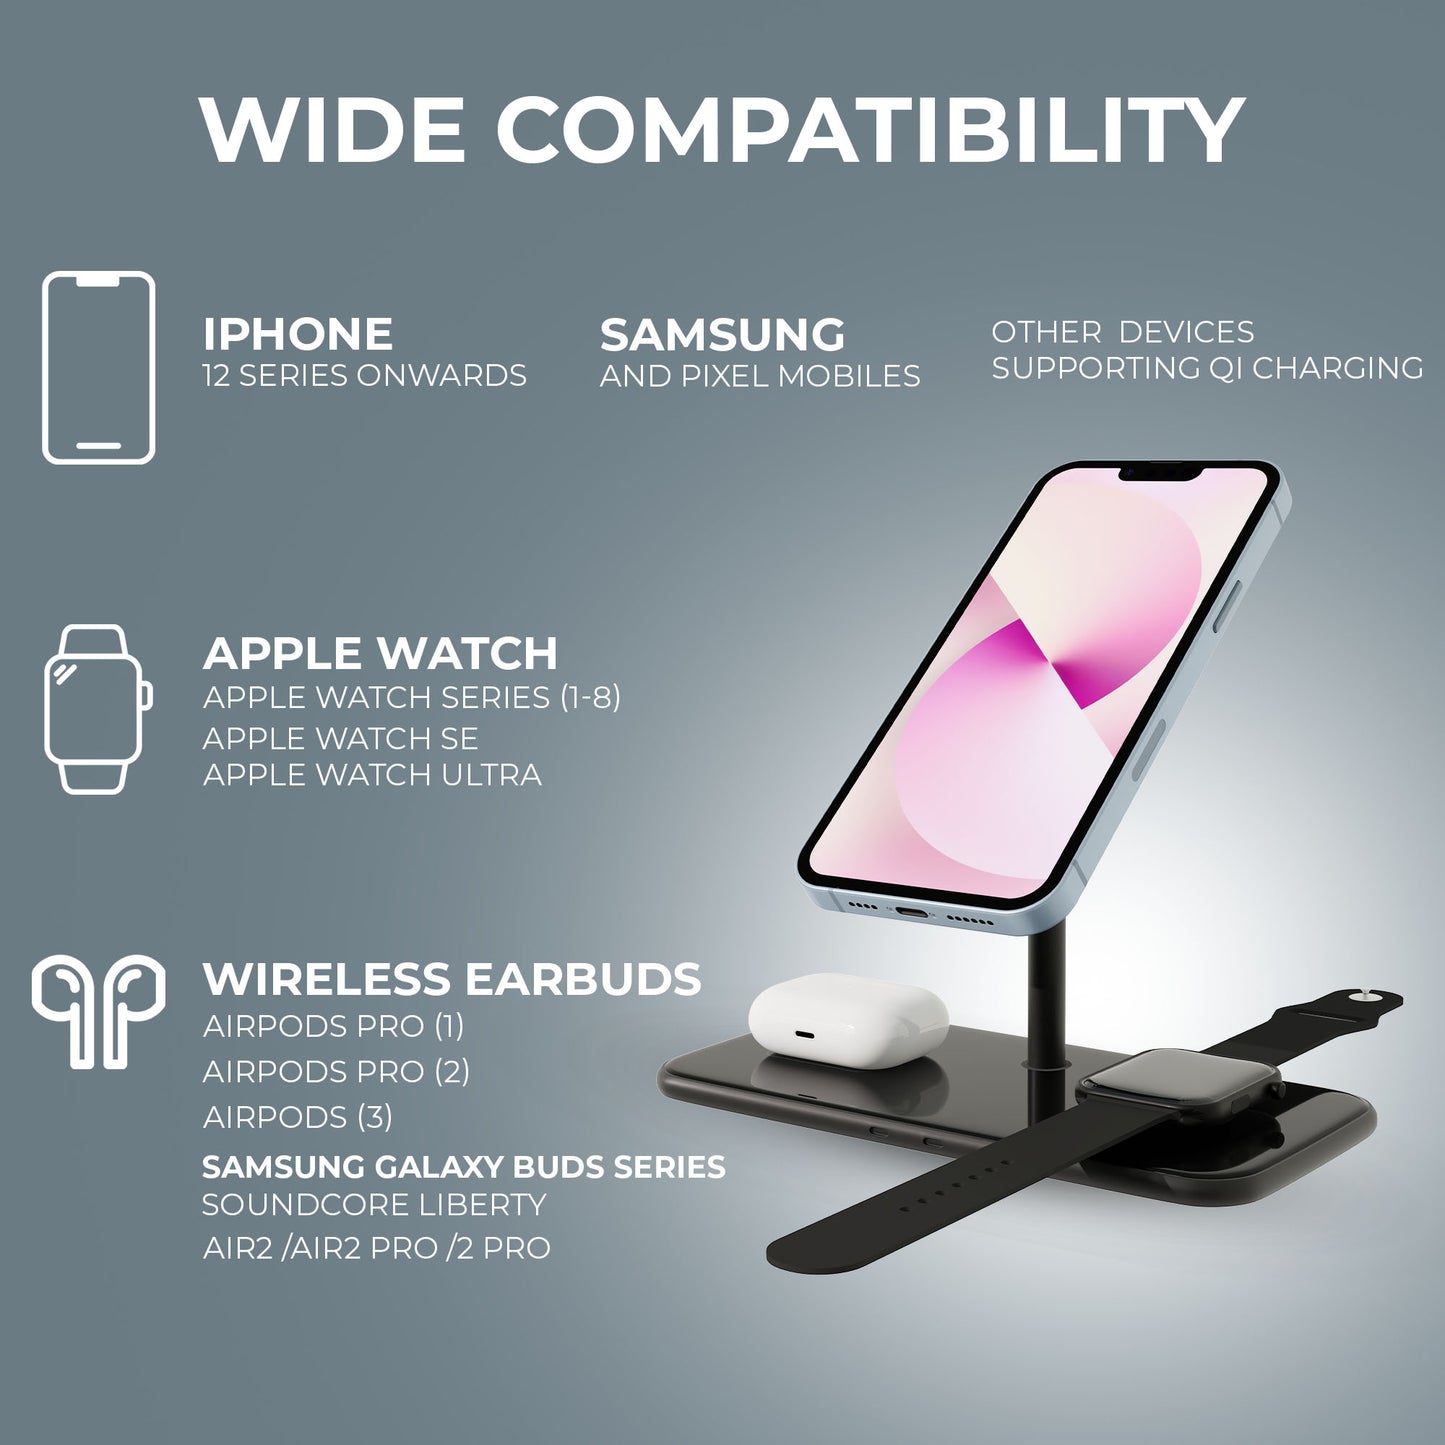 JCBL Accessories Magsafe 28.5W Fast Wireless charging stand For Mobile, Watch, Airpods Charging, SW12 Media 6 of 6 WIDE COMPATIBILITY| IPHONE SAMSUNG OTHER DEVICES 12 SERIES ONWARDS AND PIXEL MOBILES SUPPORTING QI CHARGING APPLE WATCH }  APPLE WATCH SERIES (1-8) / APPLE WATCH SE / APPLE WATCH ULTRA | WIRELESS EARBUDS AIRPODS PRO (1), AIRPODS PRO (2) ,AIRPODS (3) SAMSUNG GALAXY BUDS SERIES | SOUNDCORE LIBERTY  AIR2 /AIR2 PRO /2 PRO 